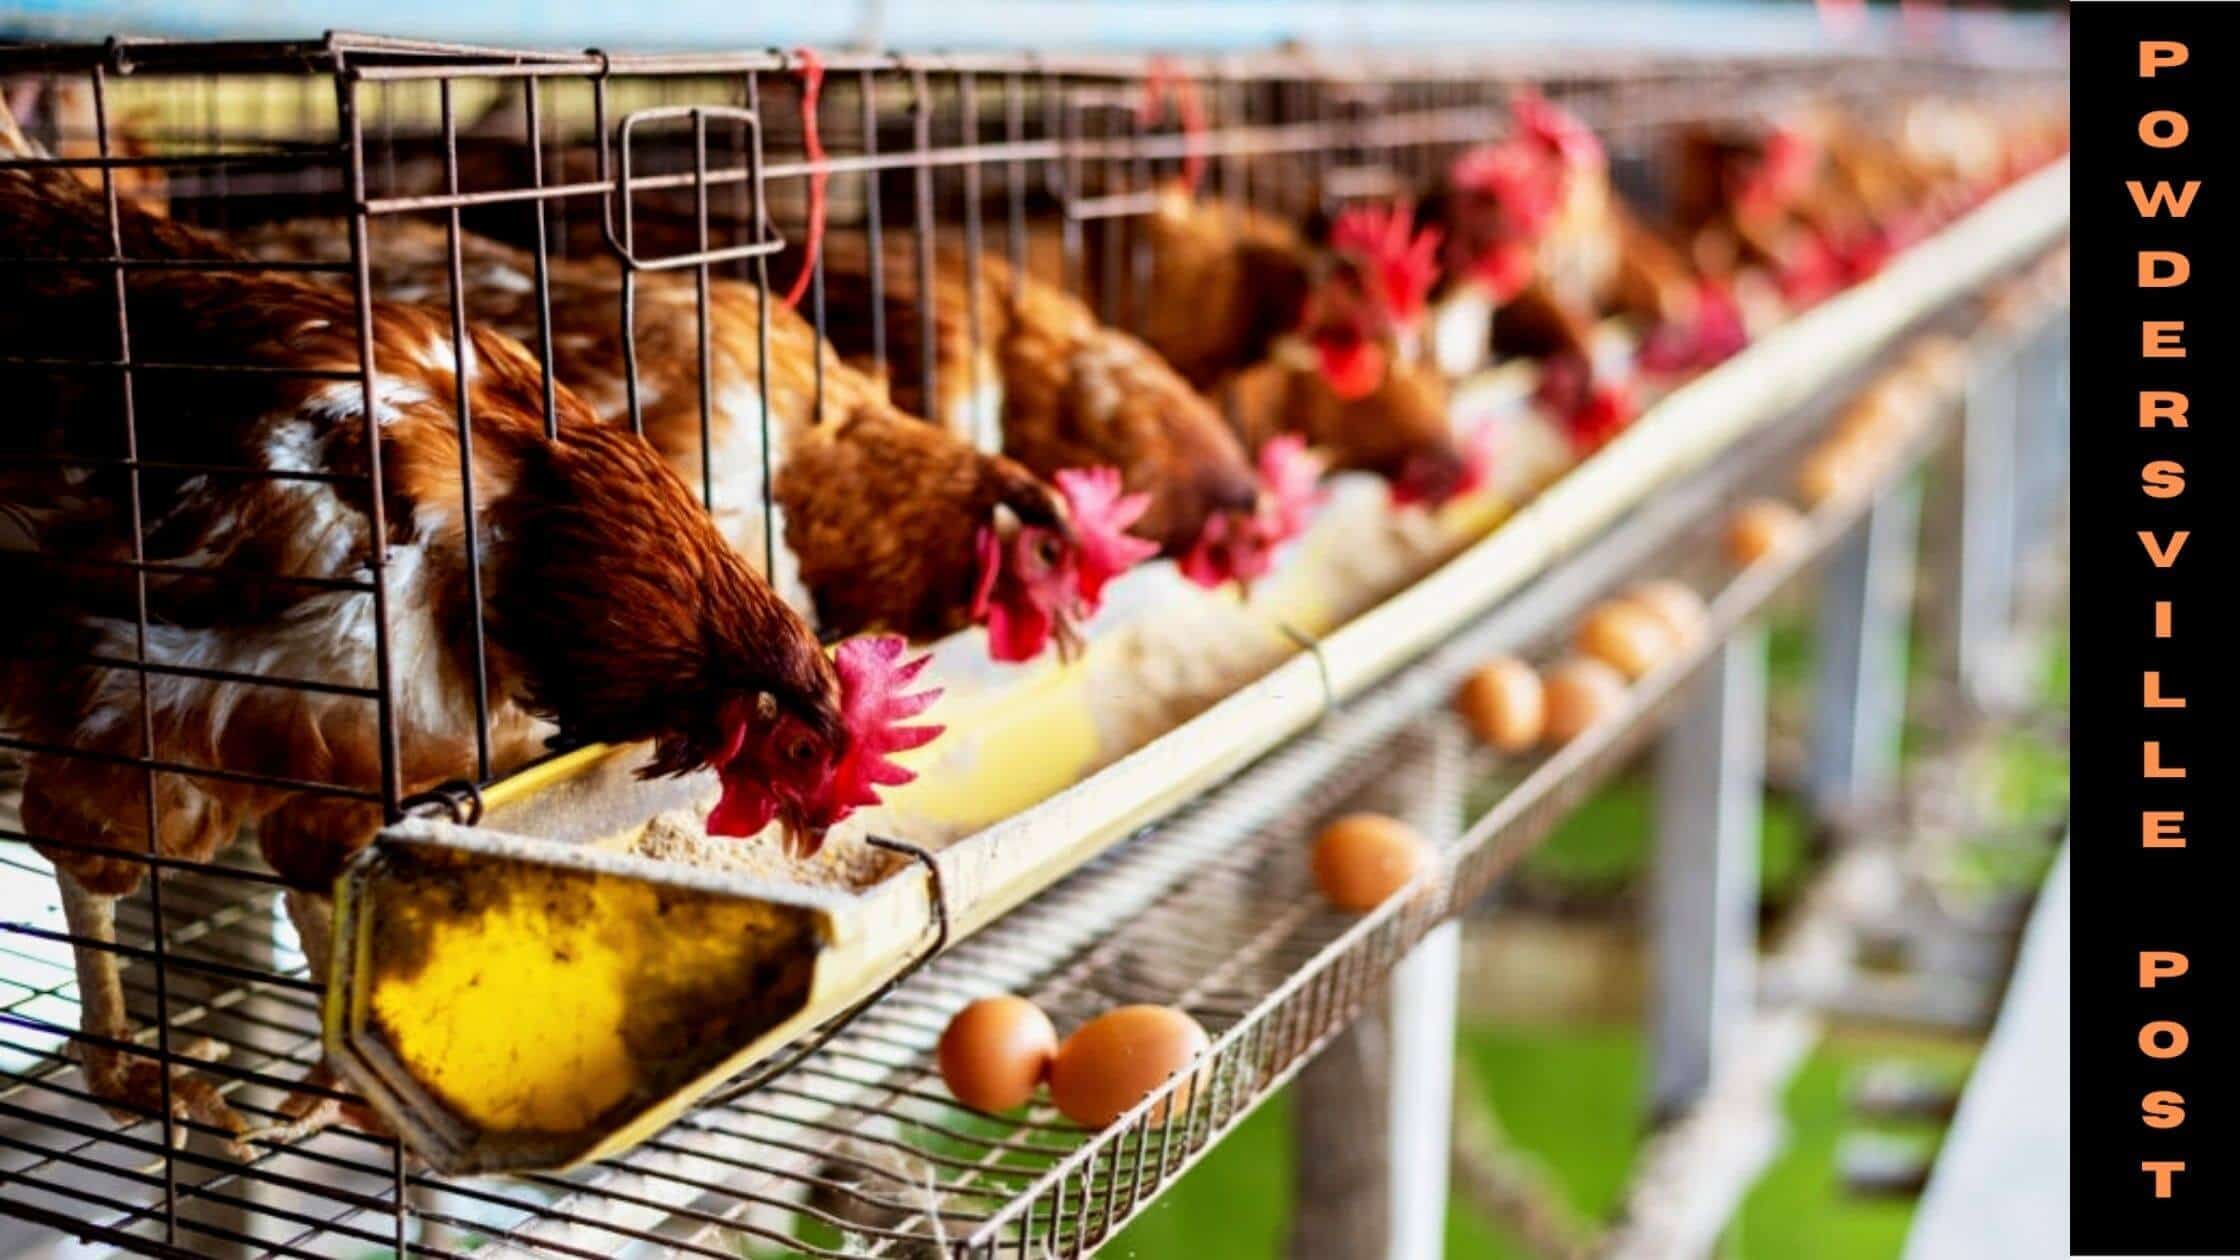 Bird Flu Is Spreading Rapidly Across The Country, Warn Poultry Producers